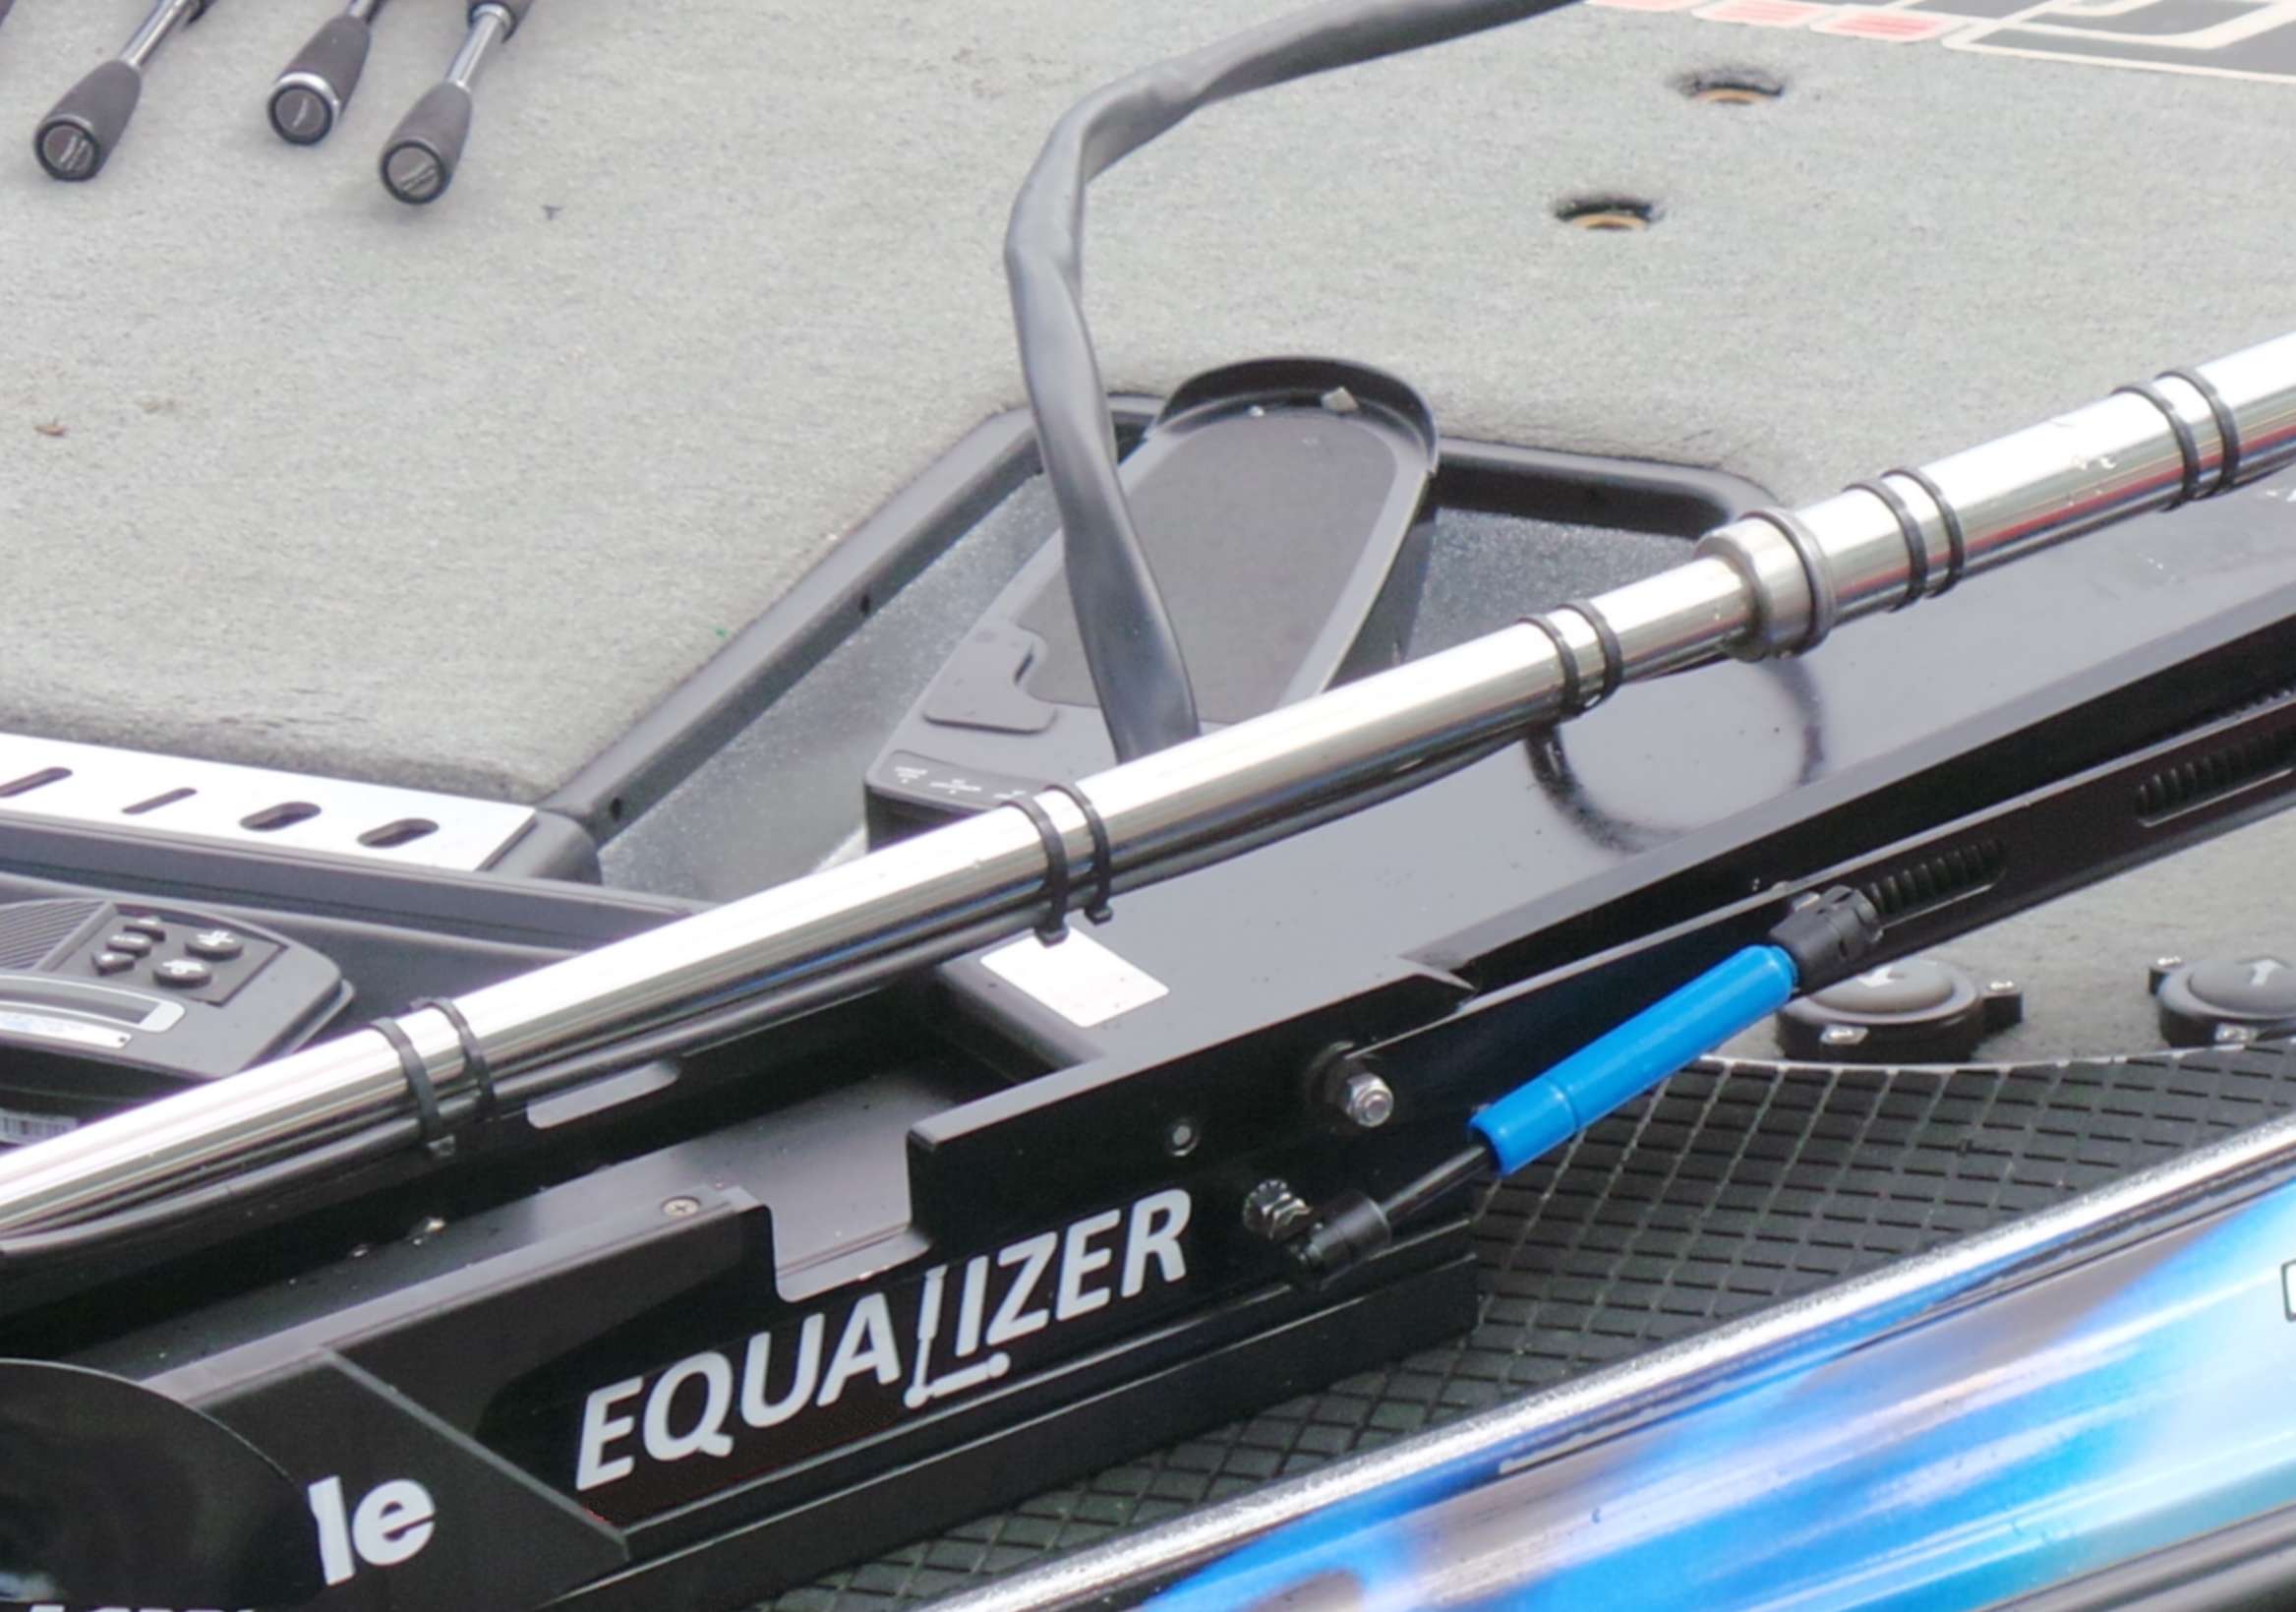 <H4>EQUALIZER Trolling Motor Lift Assist</h4> With the G-FORCE EQUALIZER Trolling Motor Lift Assist, you can reduce the lifting weight of your trolling motor by as much as 50%. The G-FORCEÂ® EQUALIZERâ¢ trolling motor list assist system consists of two air pistons that attach to almost any Motorguide Gator Mount to provide effortless lifting in-and-out of the water. Complete with easy-to-follow instructions, drilling template, and marine-grade hardware, the EQUALIZER is quick and straightforward to install. A must-have for any Motorguide owner, the EQUALIZER is a great way to offset the added weight of StructureScans and Hydrowaves, so your time on the water is as comfortable as possible.

<a href=